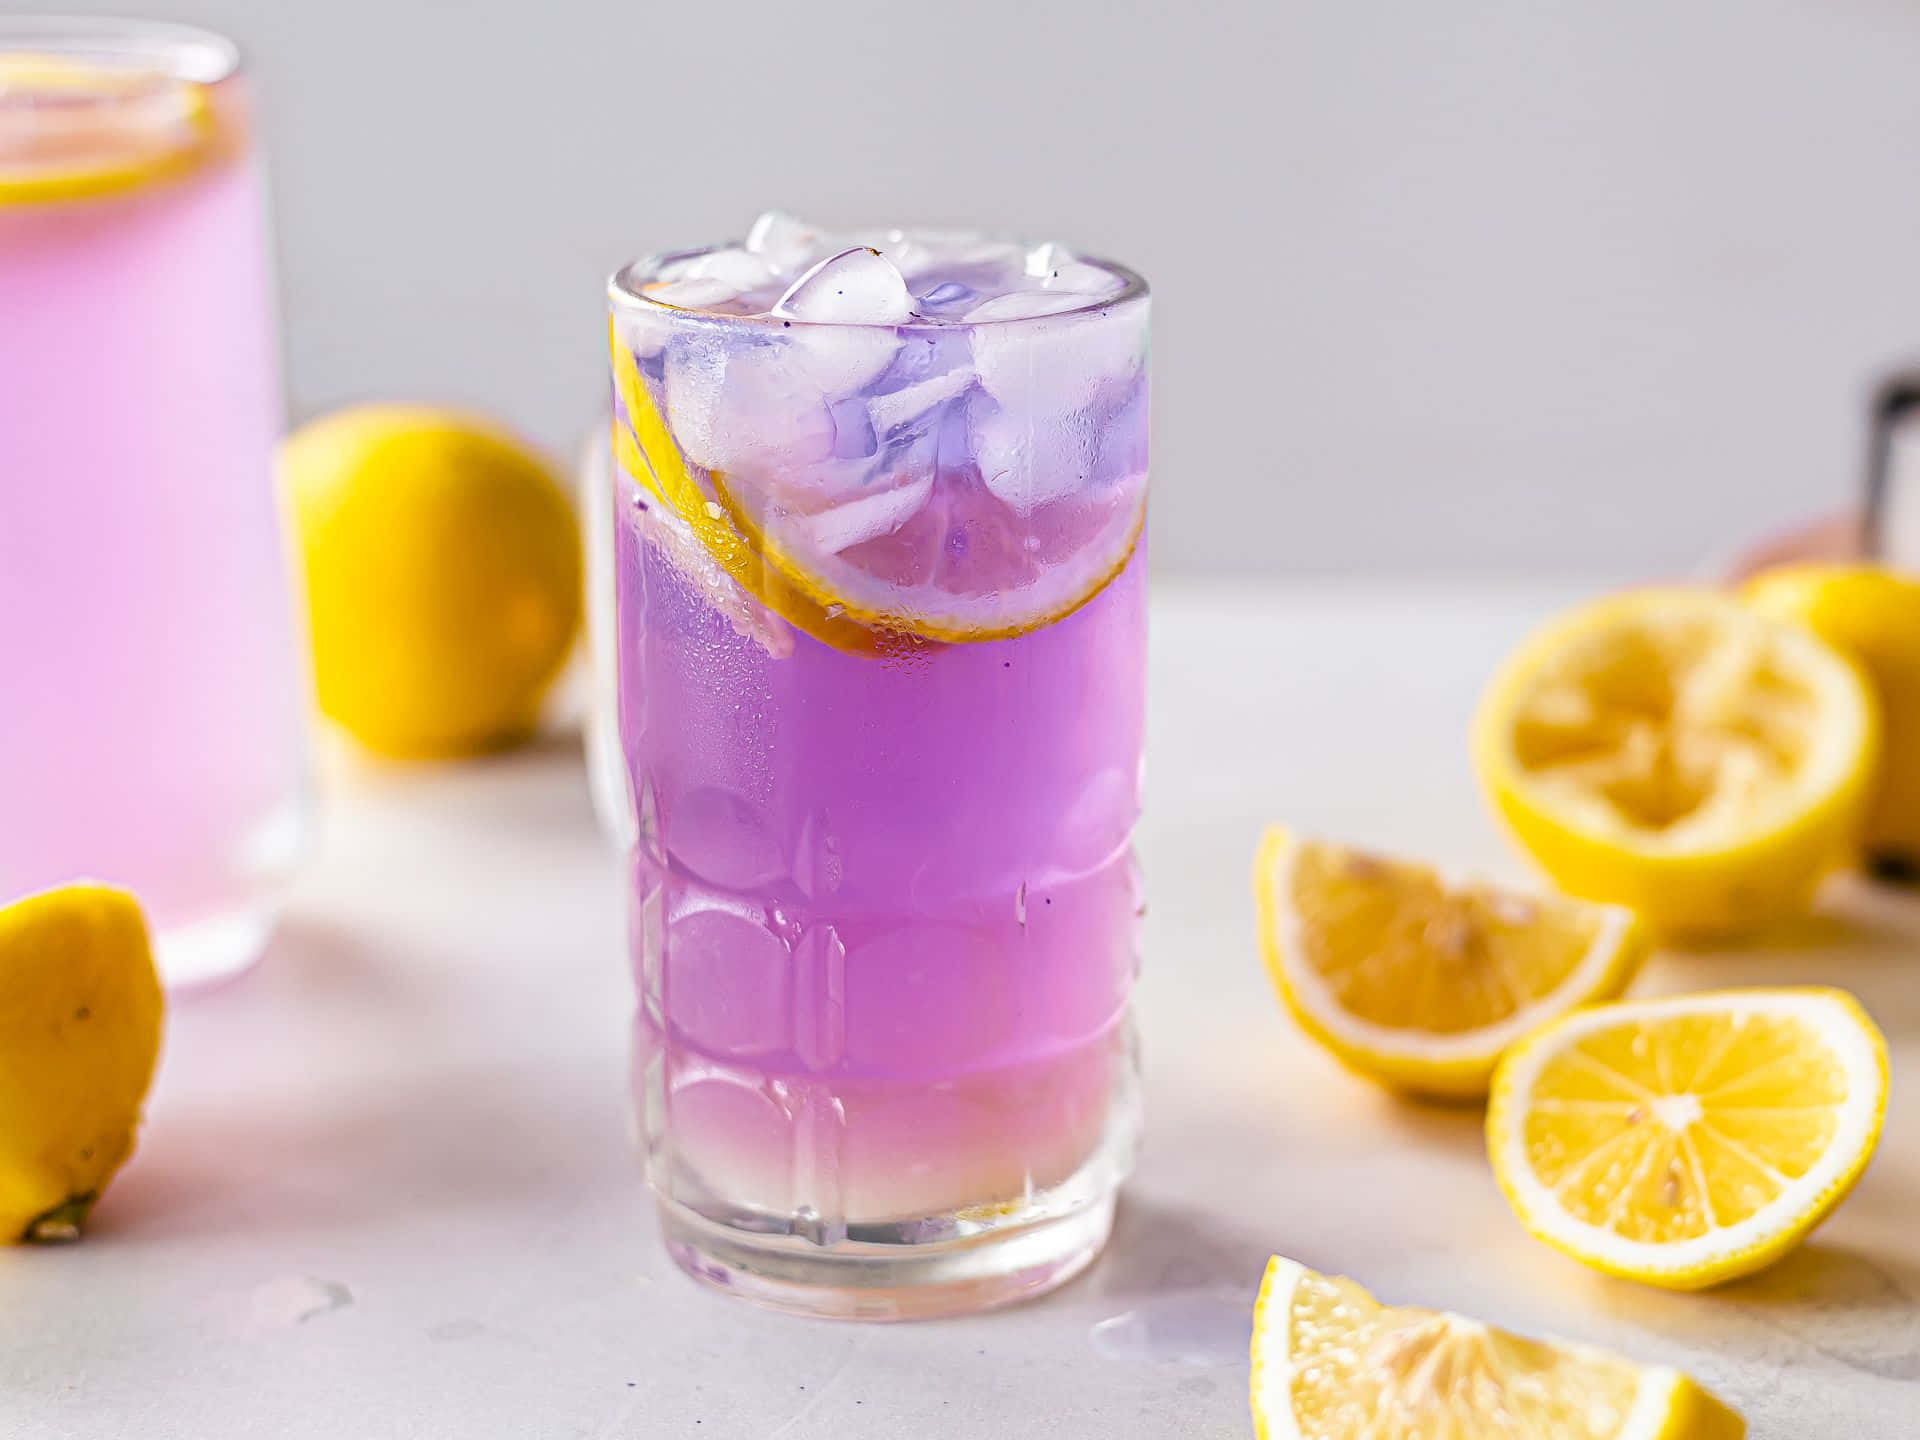 A Purple Drink With Lemon Slices And Ice